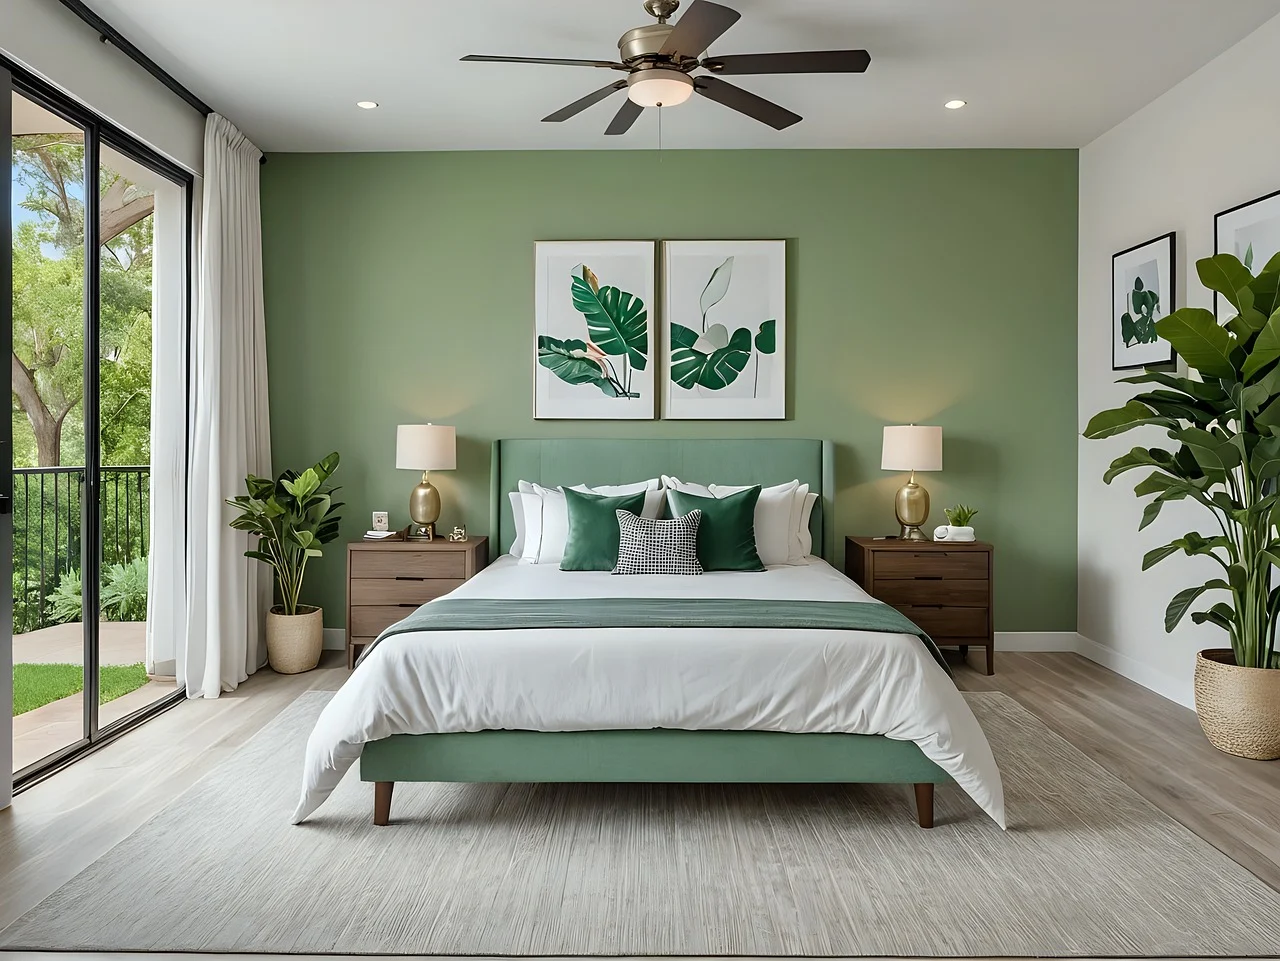 an image of interior design with green wall , fan on roof and bed with white bed sheet